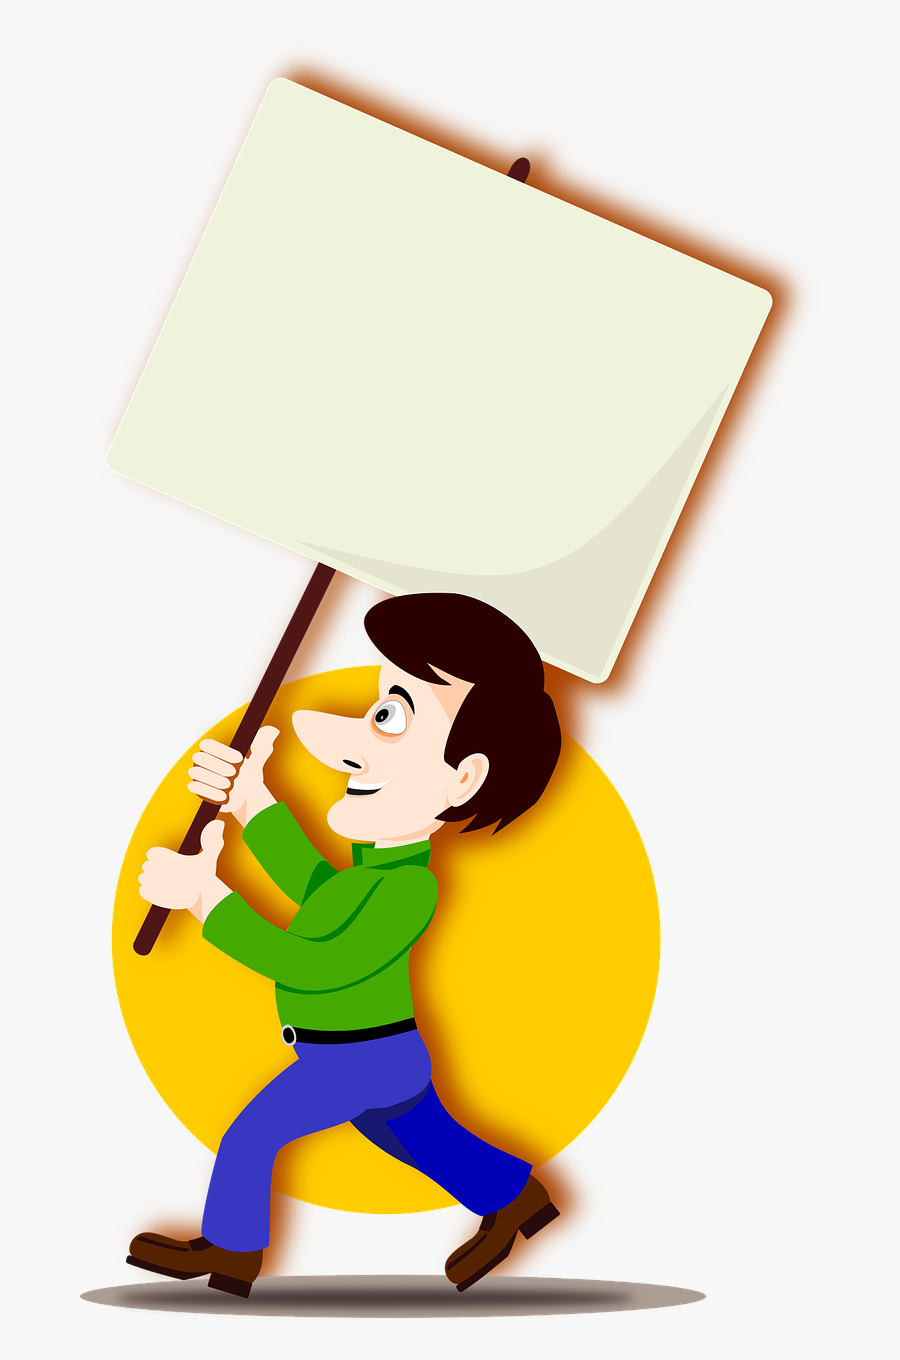 Protester Poster Protest Free Picture - Manifestant Png, Transparent Clipart